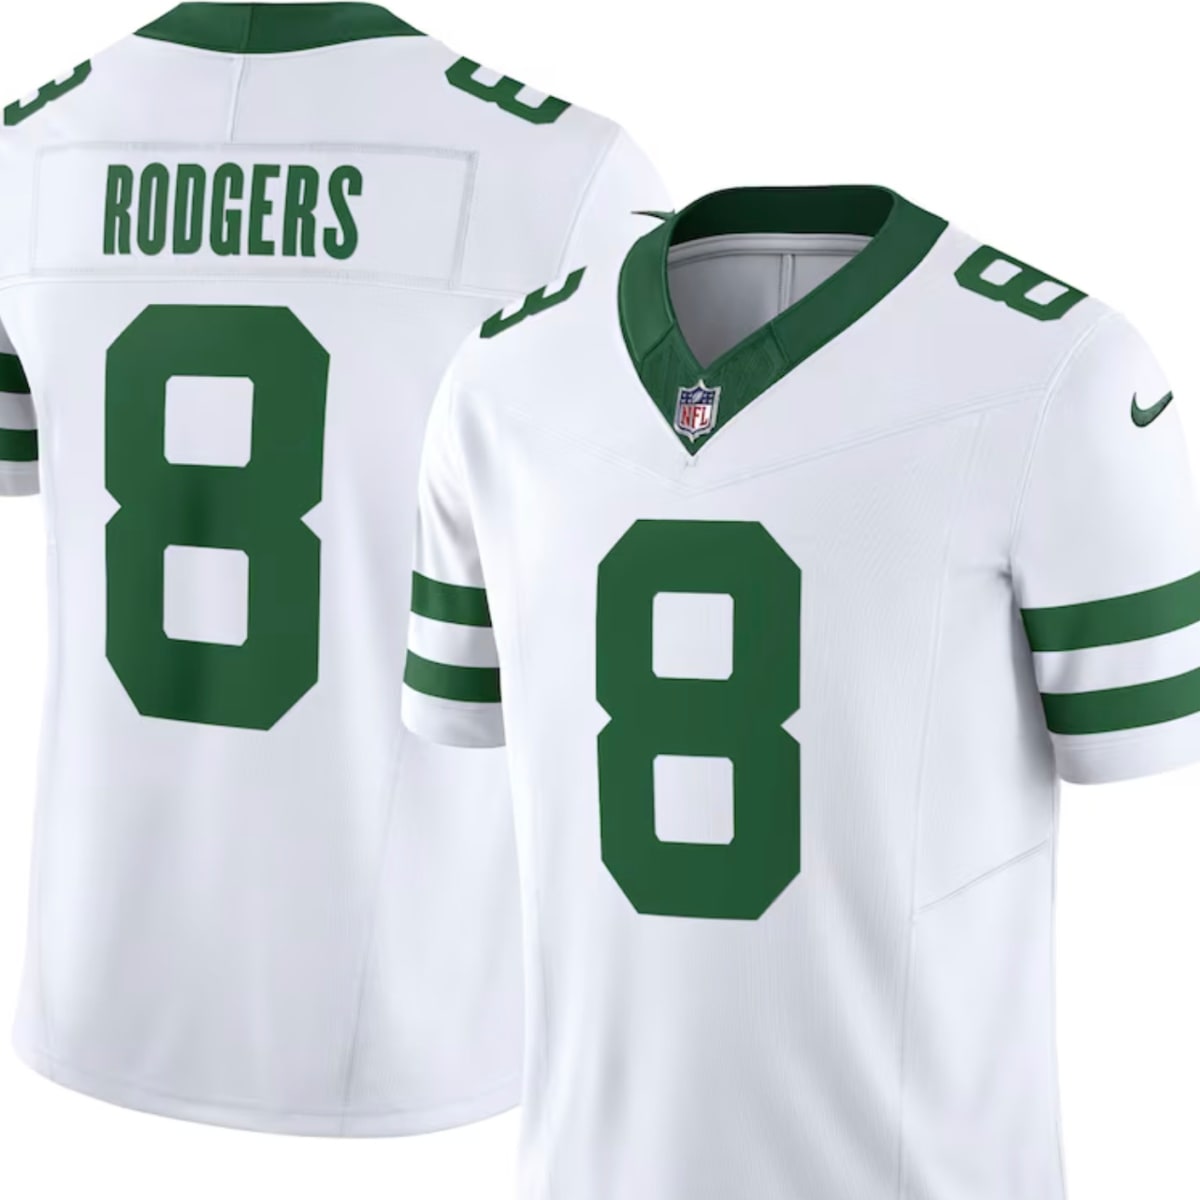 Where to buy New York Jets 2023 Throwback Jersey - FanNation